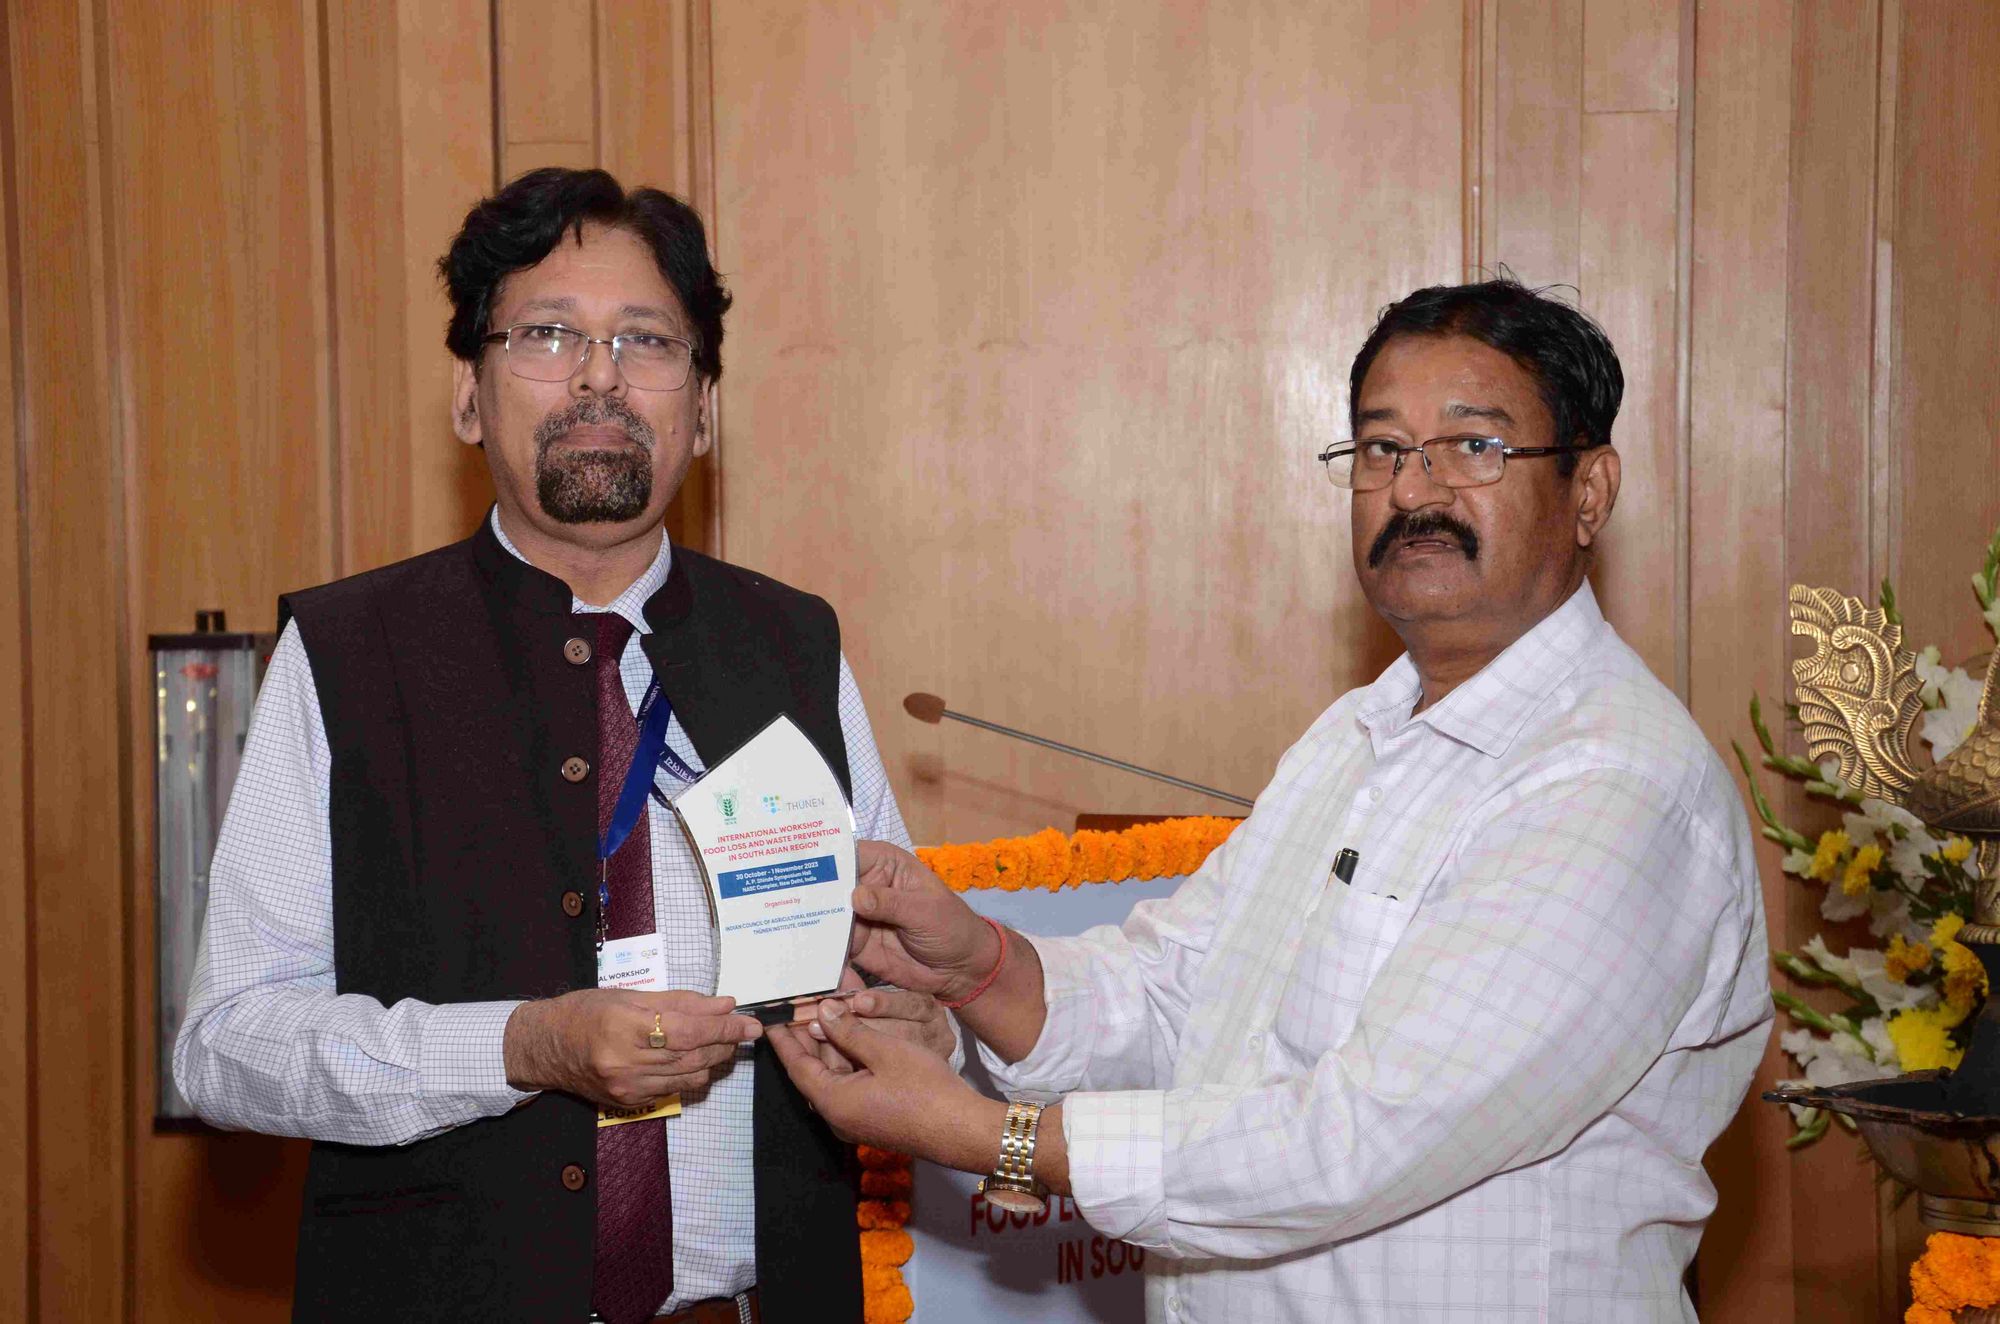 Dr Devinder Dhingra, principal scientist and head of workshop organising team from Indian Council of Agricultural Research, receives his memento by Dr. Abhay Kumar Thakur, Principal Scientist at  Indian Council of Agricultural Research.